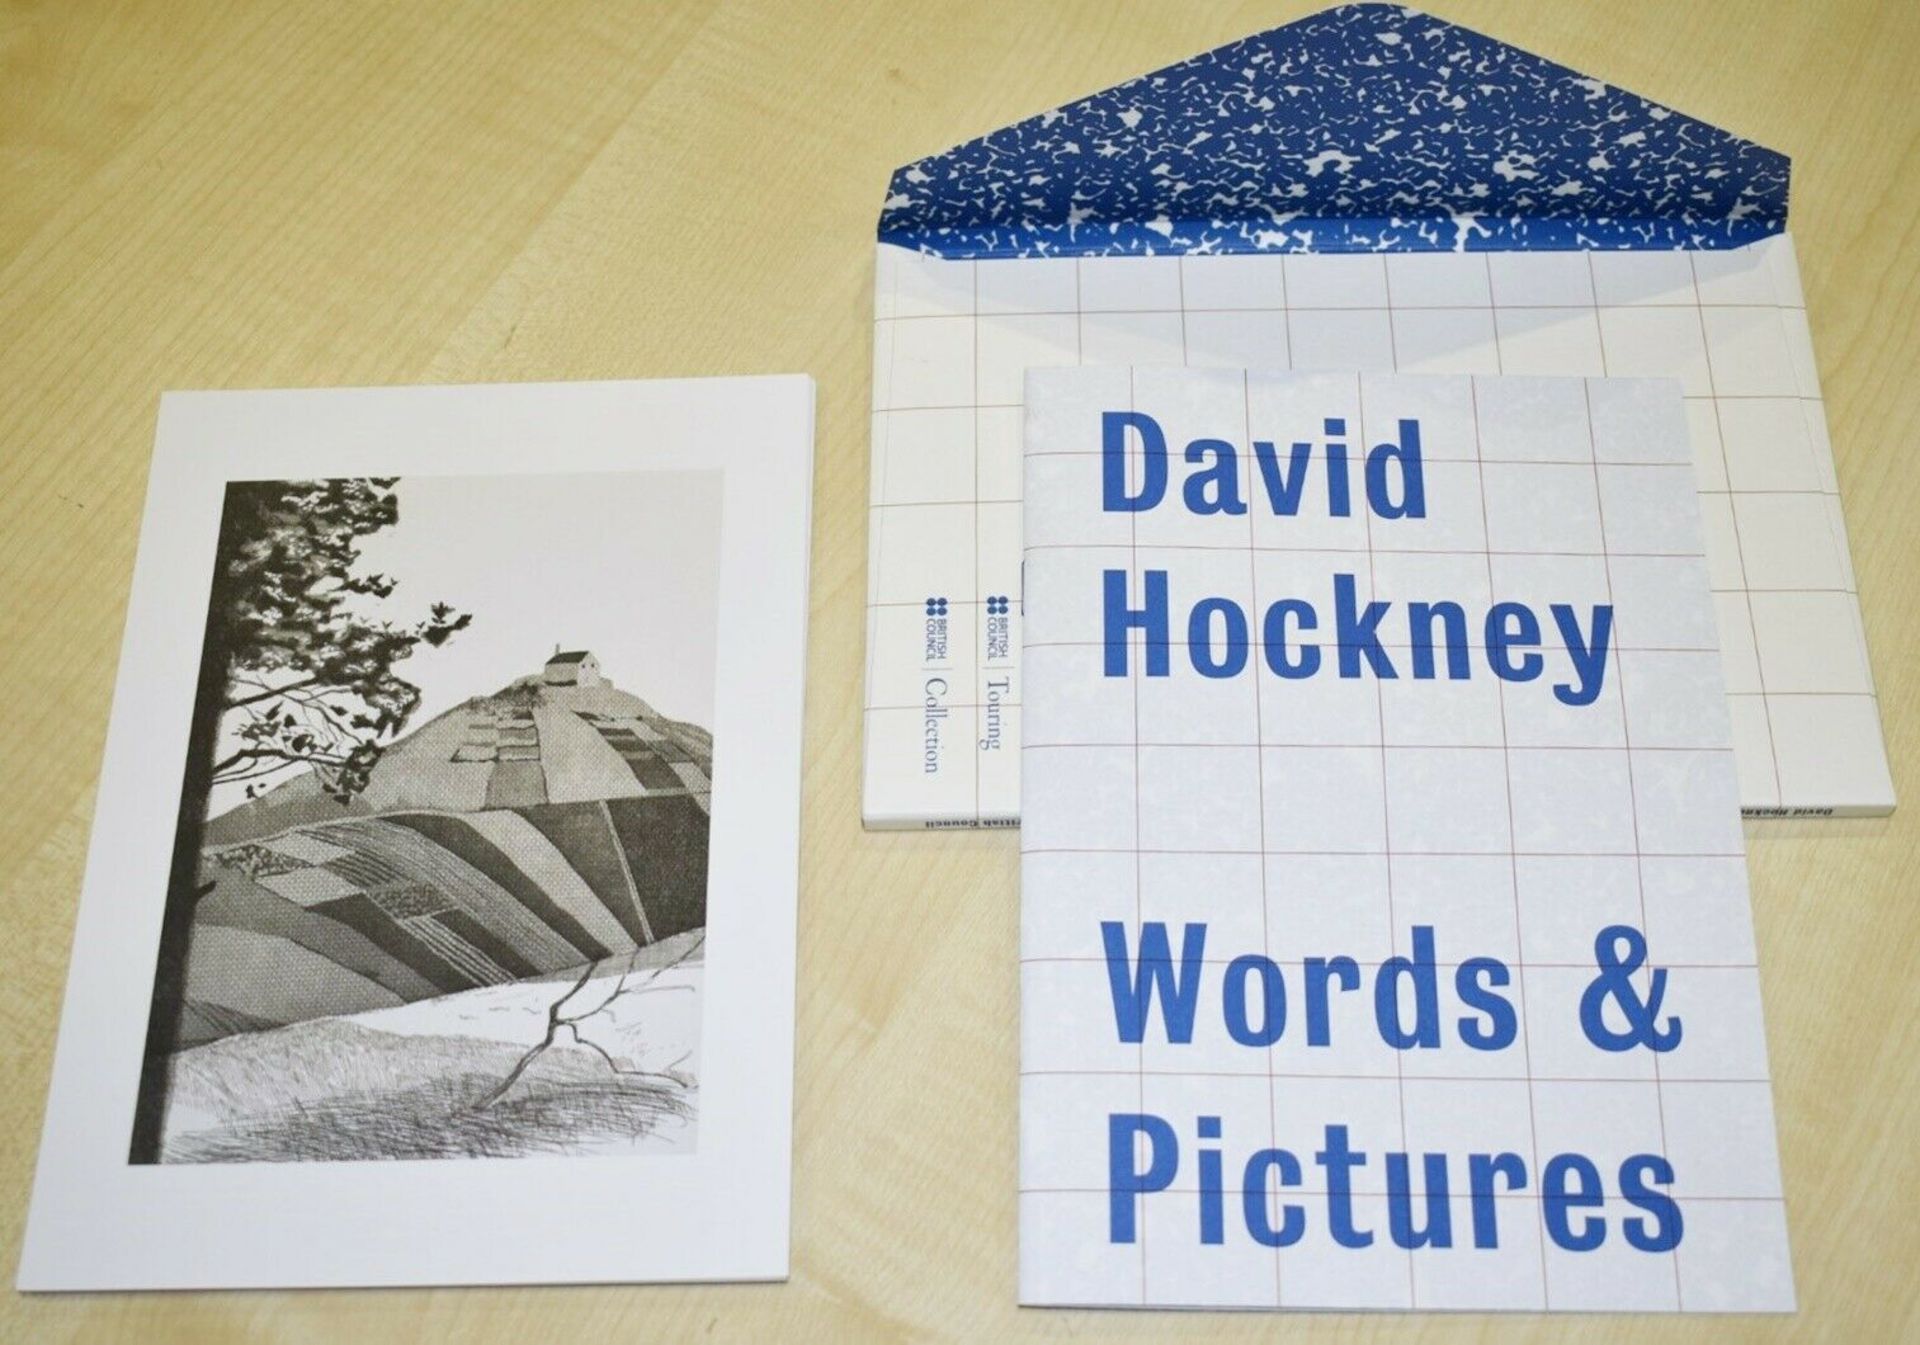 1 x David Hockney Words & Pictures - British Council Touring Program With 11 Prints - Brand New